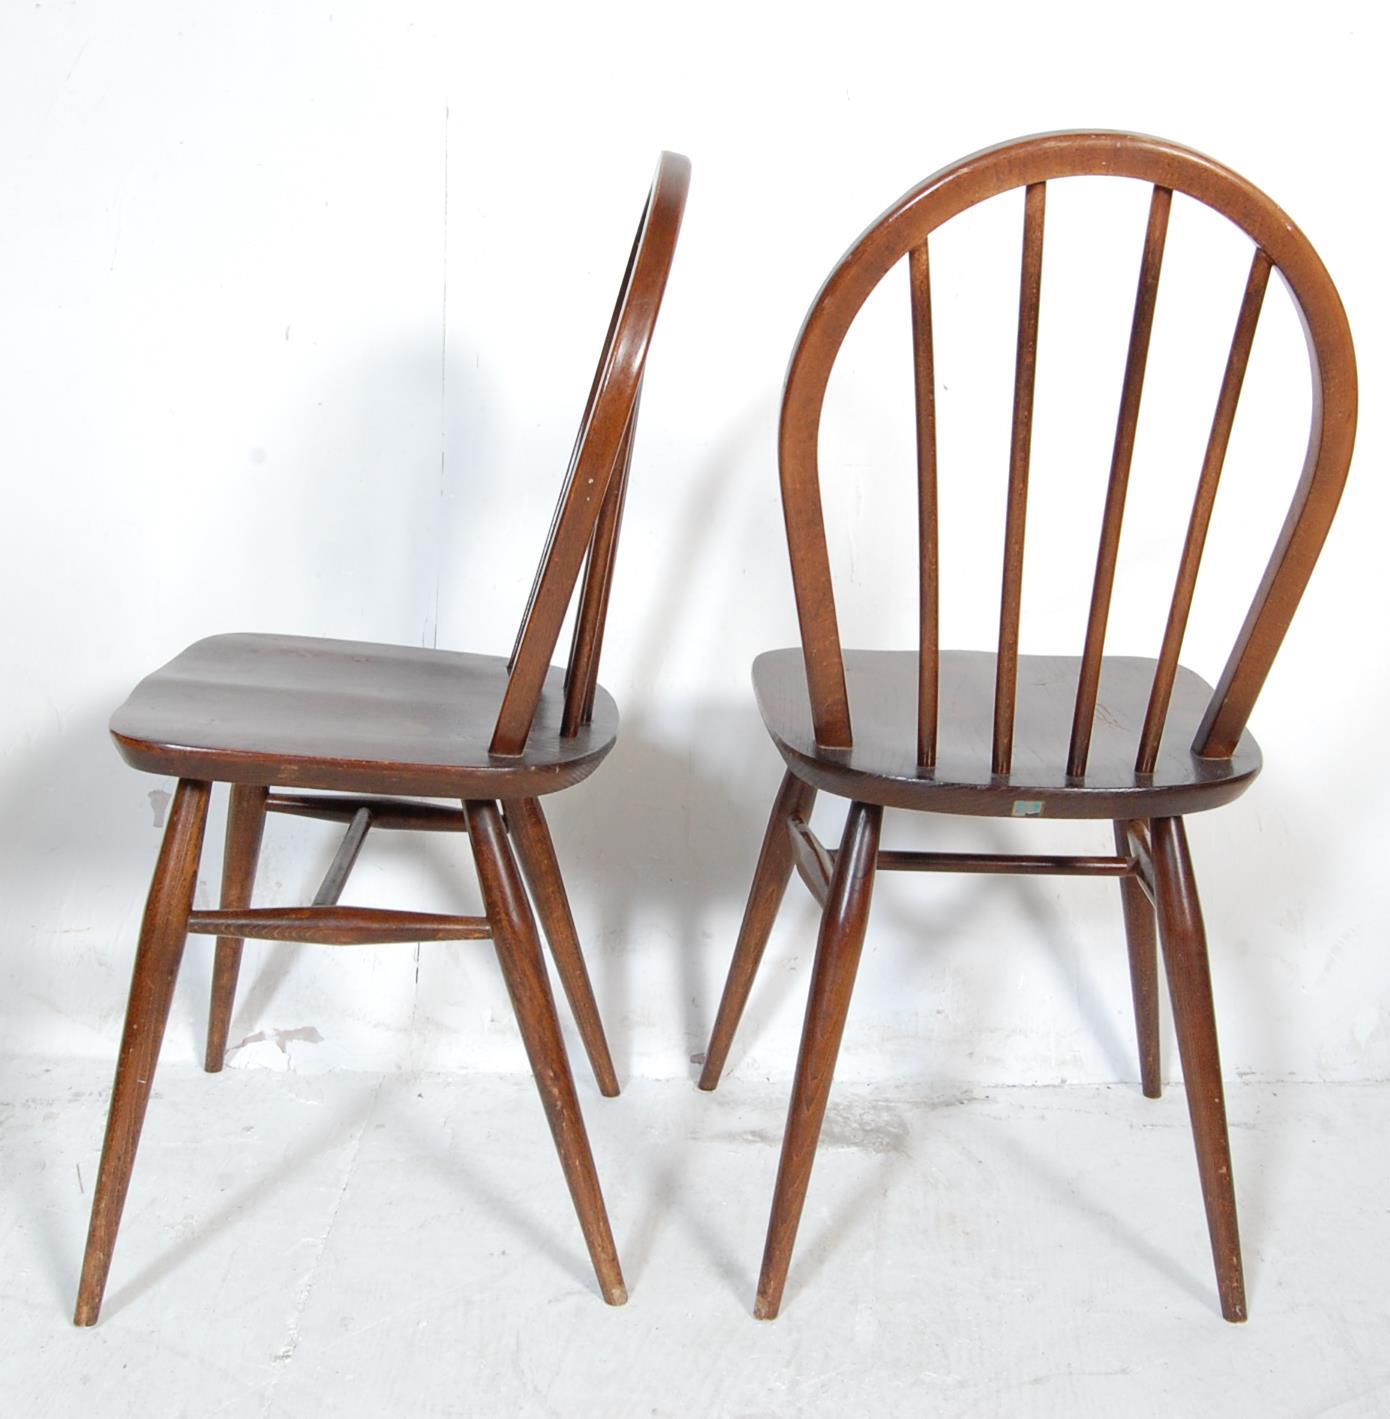 TWO 1950’S BEECH AND ELM DINING CHAIRS - Image 6 of 7